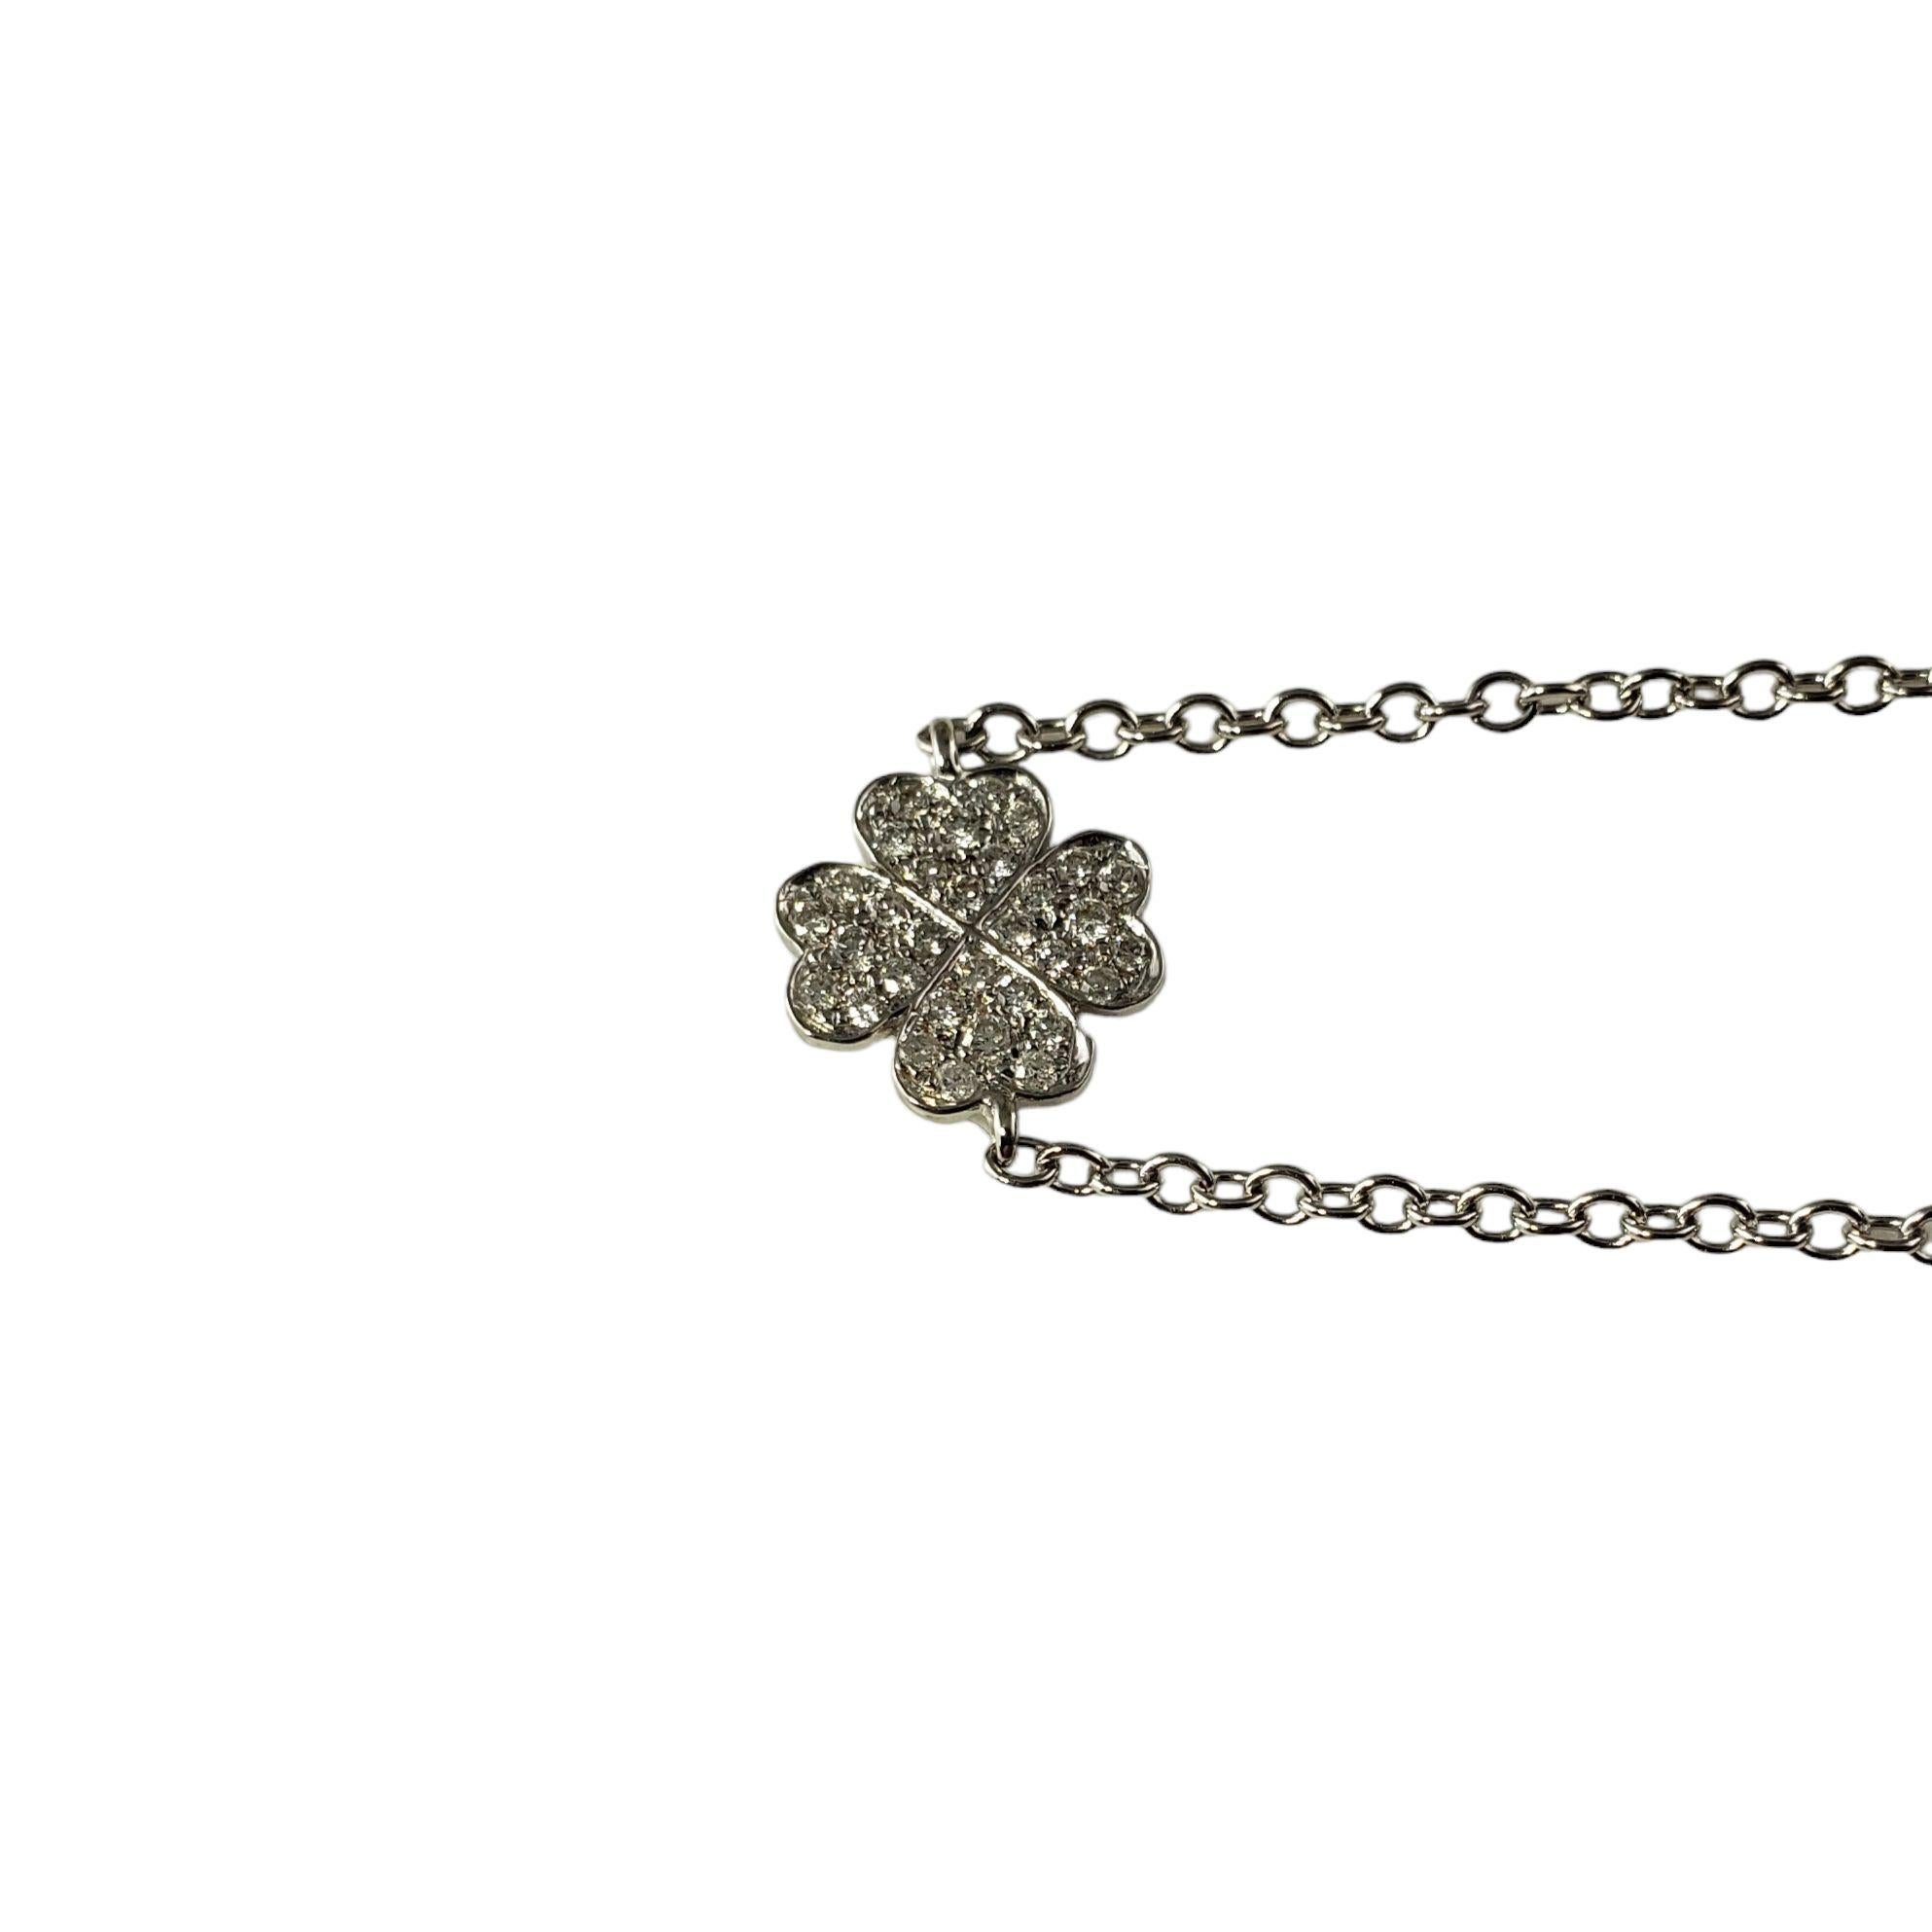 14 Karat White Gold and Diamond Clover Bracelet-

This lovely four leaf clover bracelet features 32 round brilliant cut diamonds set in classic 14K white gold.

Approximate total diamond weight: .20 ct.

Diamond clarity: SI1

Diamond color: